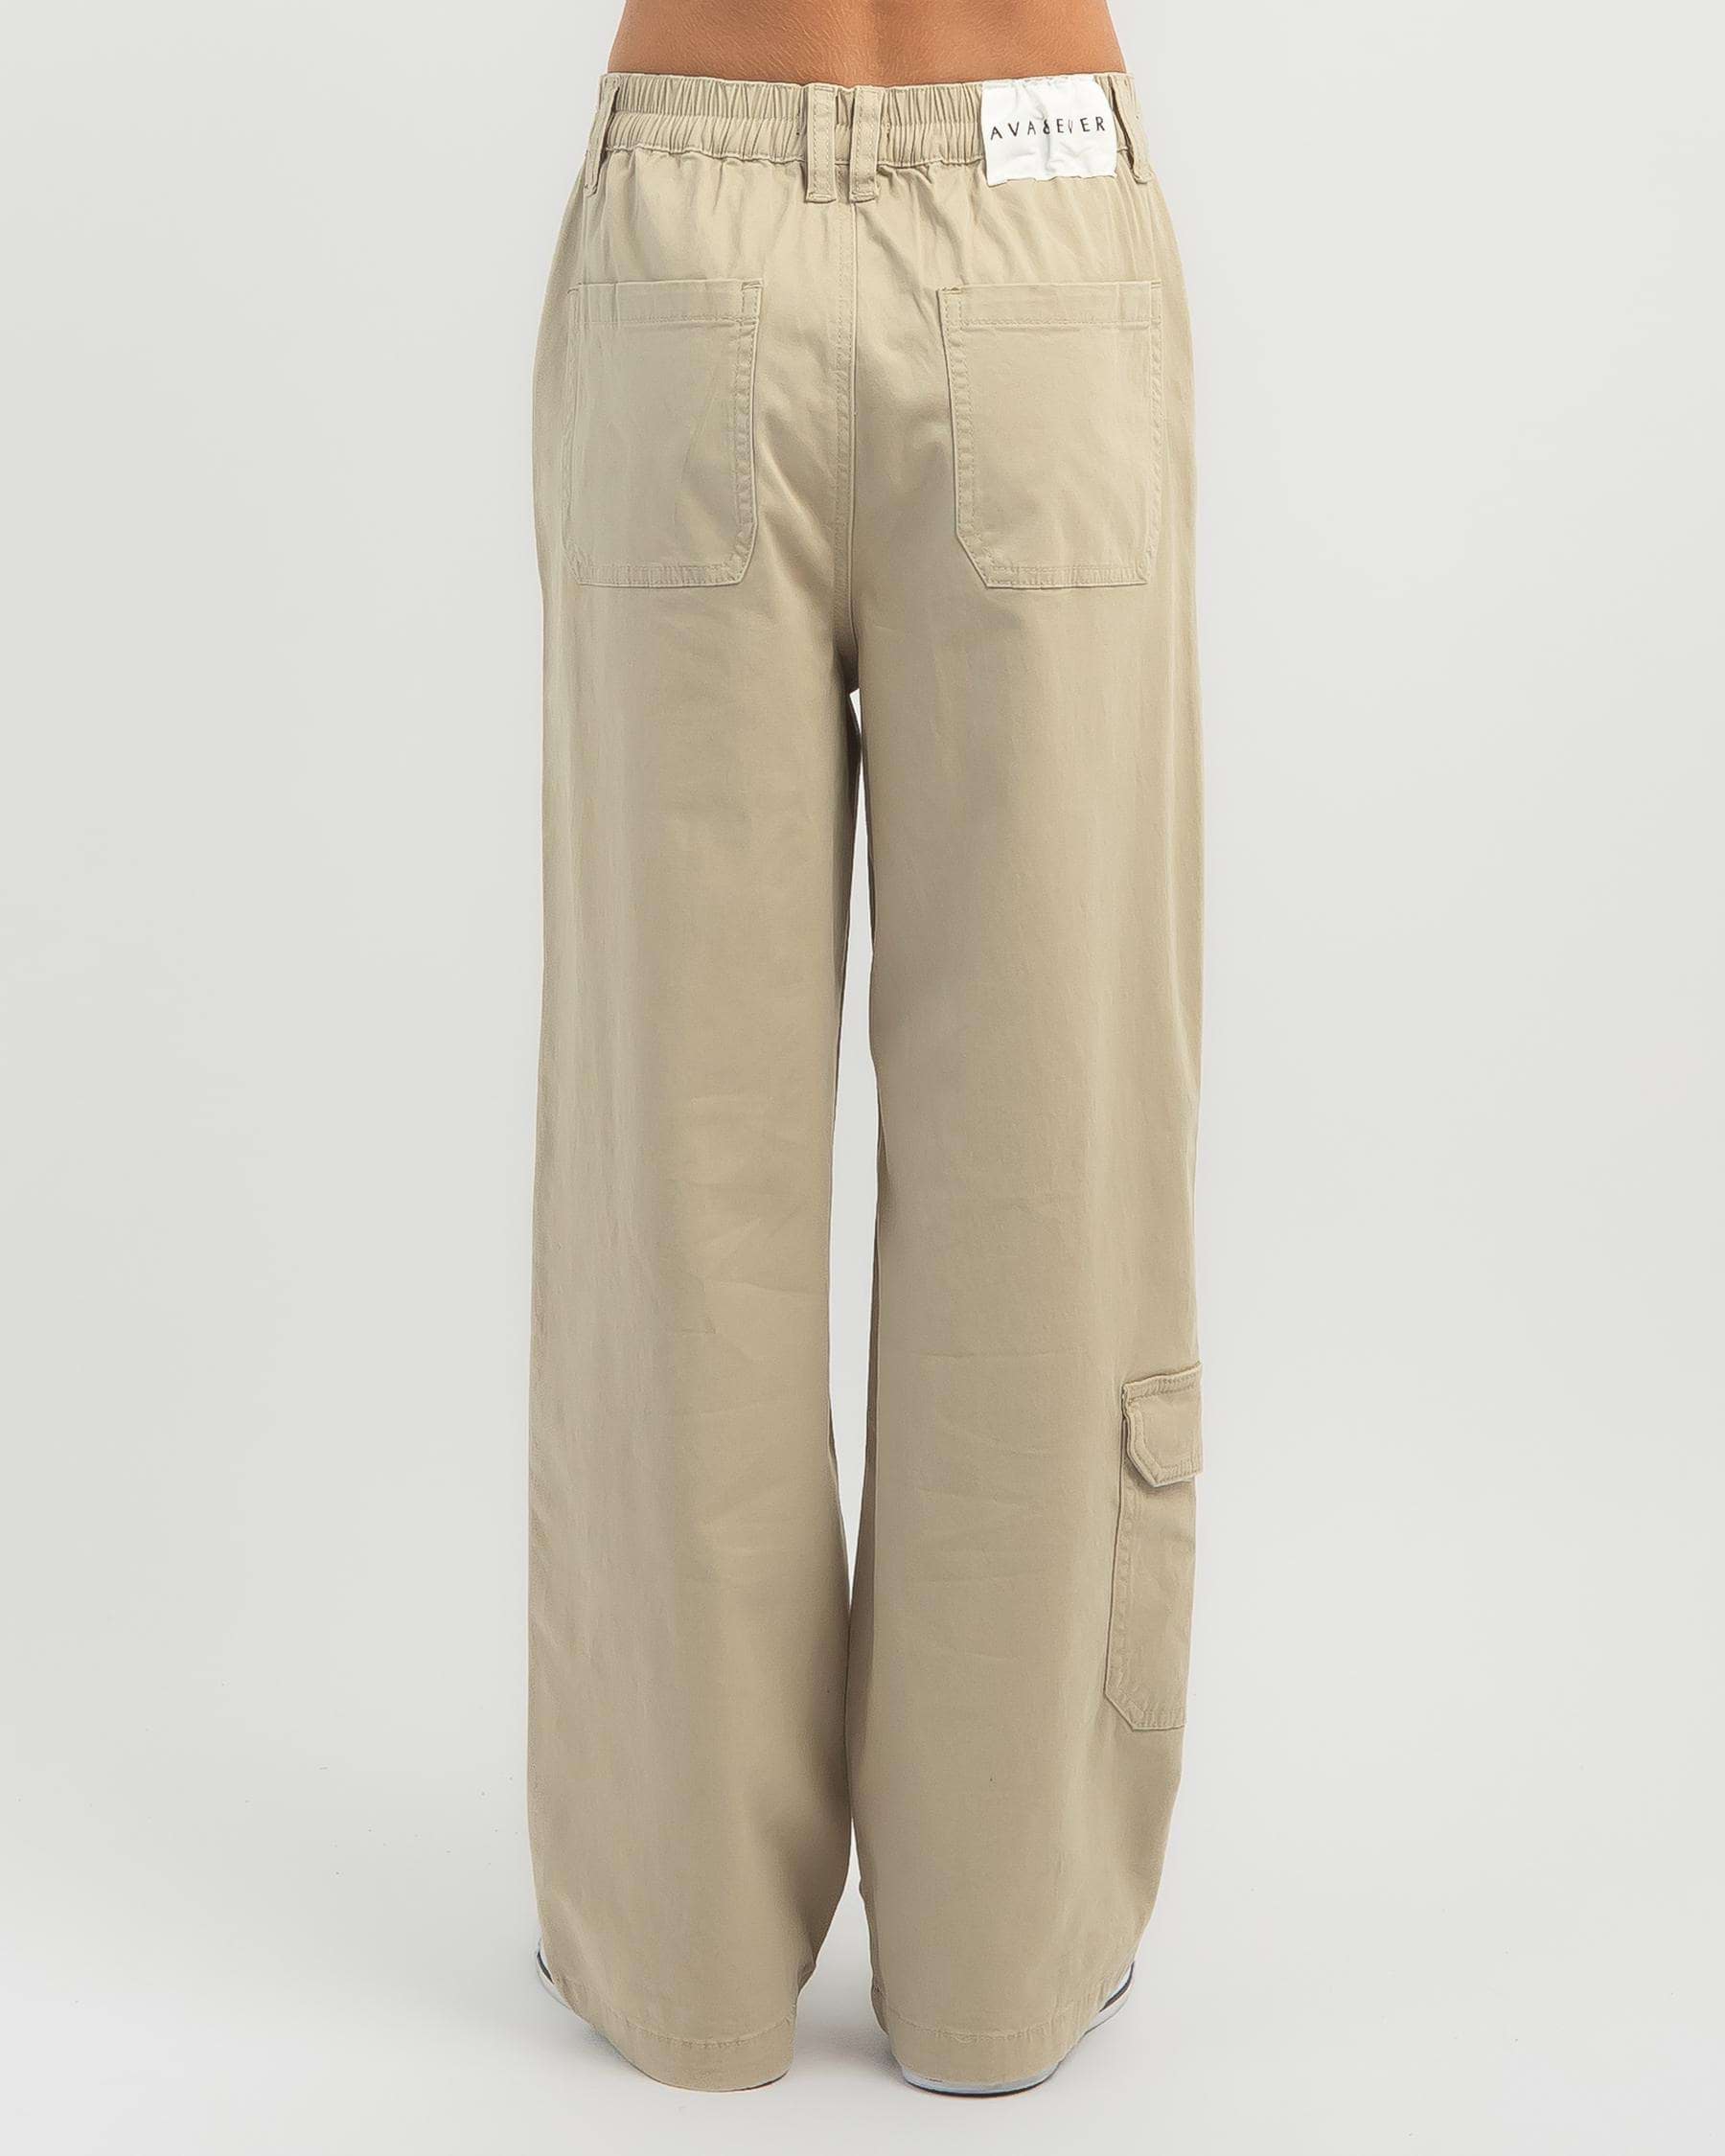 Ava And Ever Girls' Crew Pants In Beige - Fast Shipping & Easy Returns ...